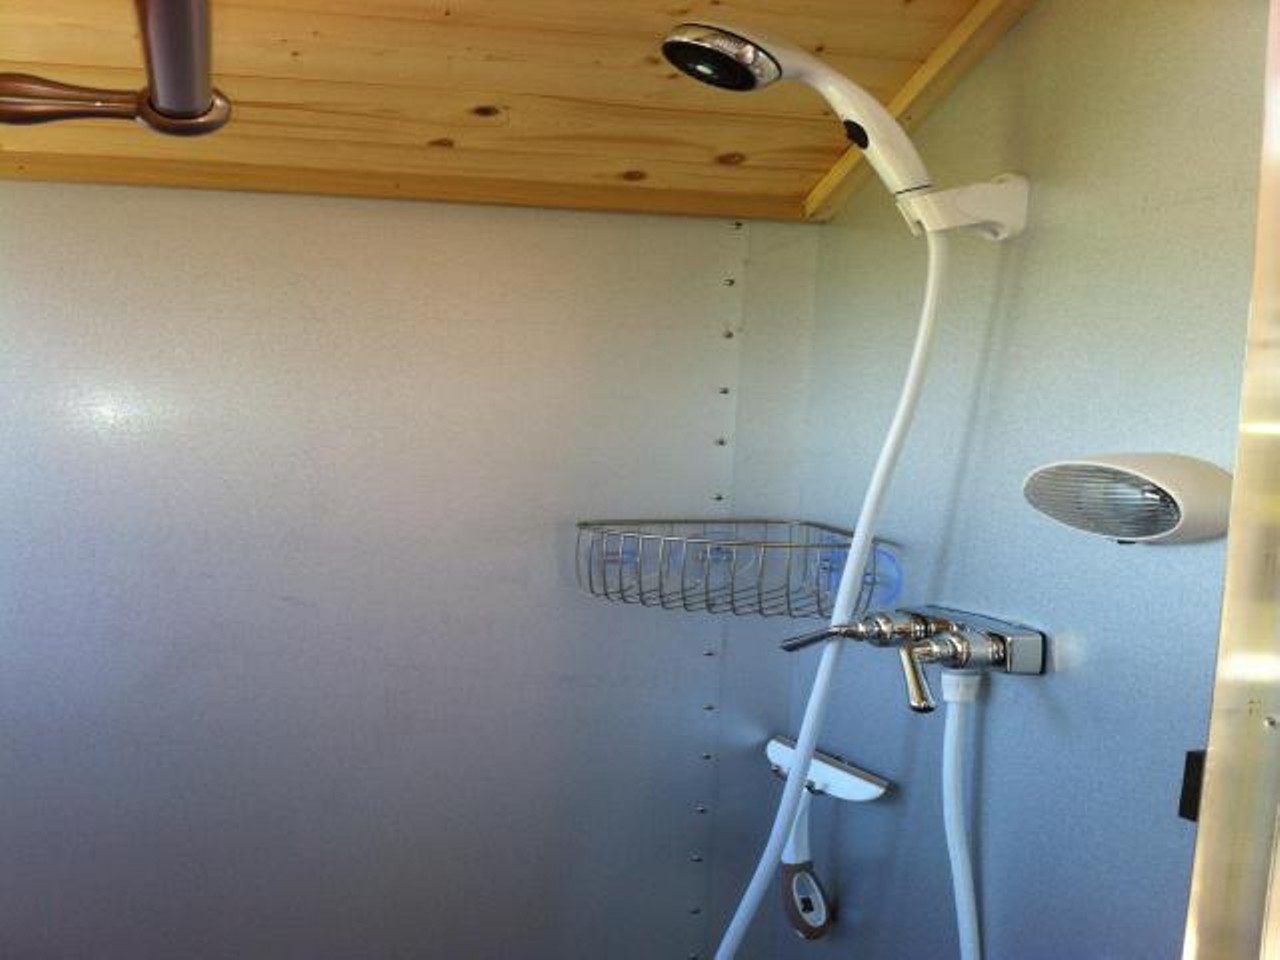 The 72 SF Tiny House
Location: Eustis
Price: $16999
Size: 72 sq ft 
A detachable shower head is really nice, especially in a super tiny shower. Plus, it has a propane water heater.